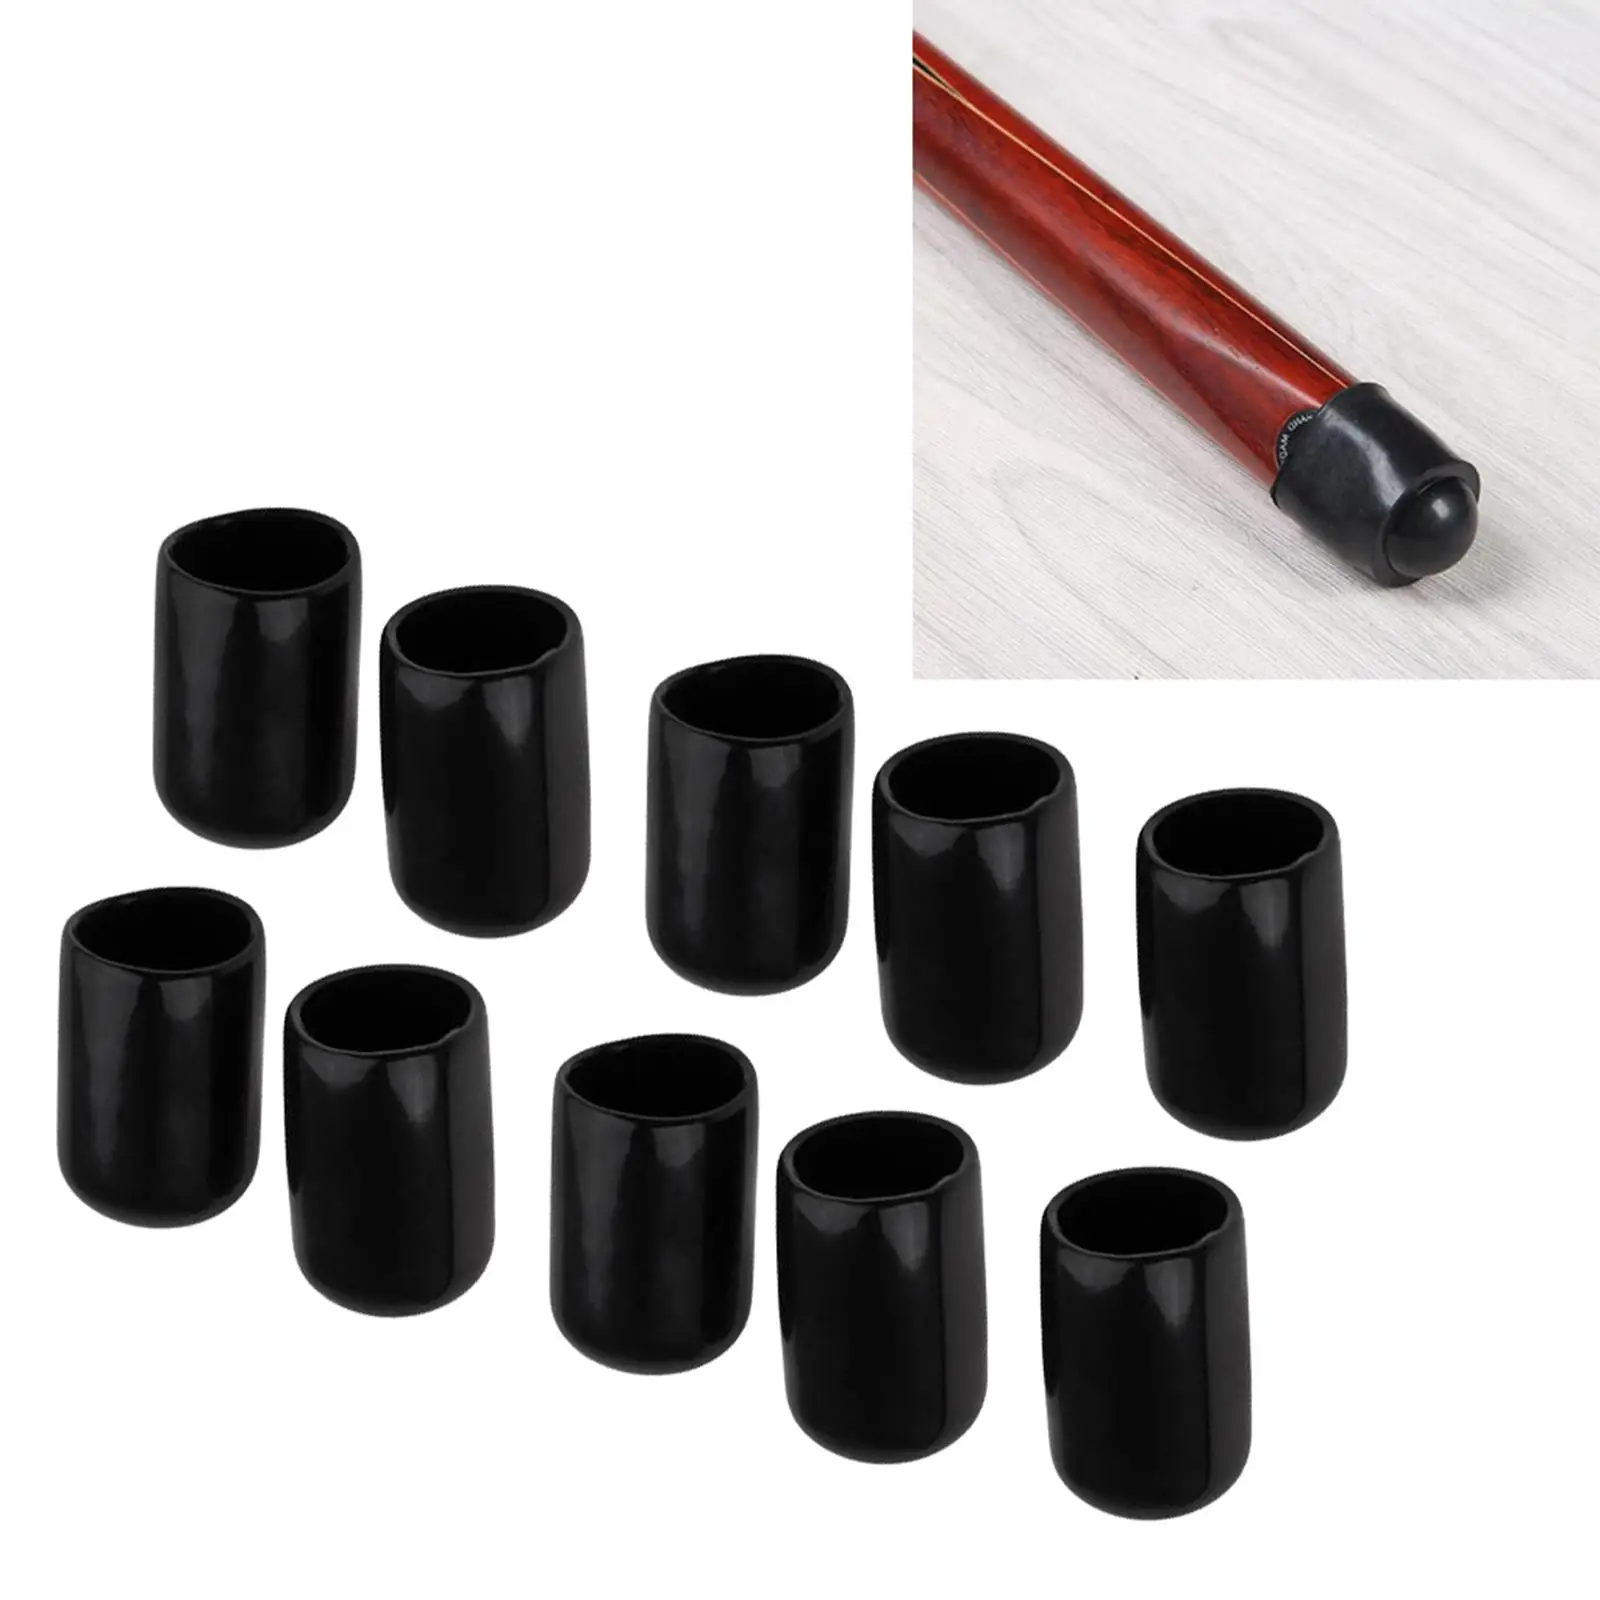 10x Pool Cue Tips Cover Durable 10mm Shockproof Black Billiards Cues Stick Protection Cover for Snooker Billiards Pool Cue